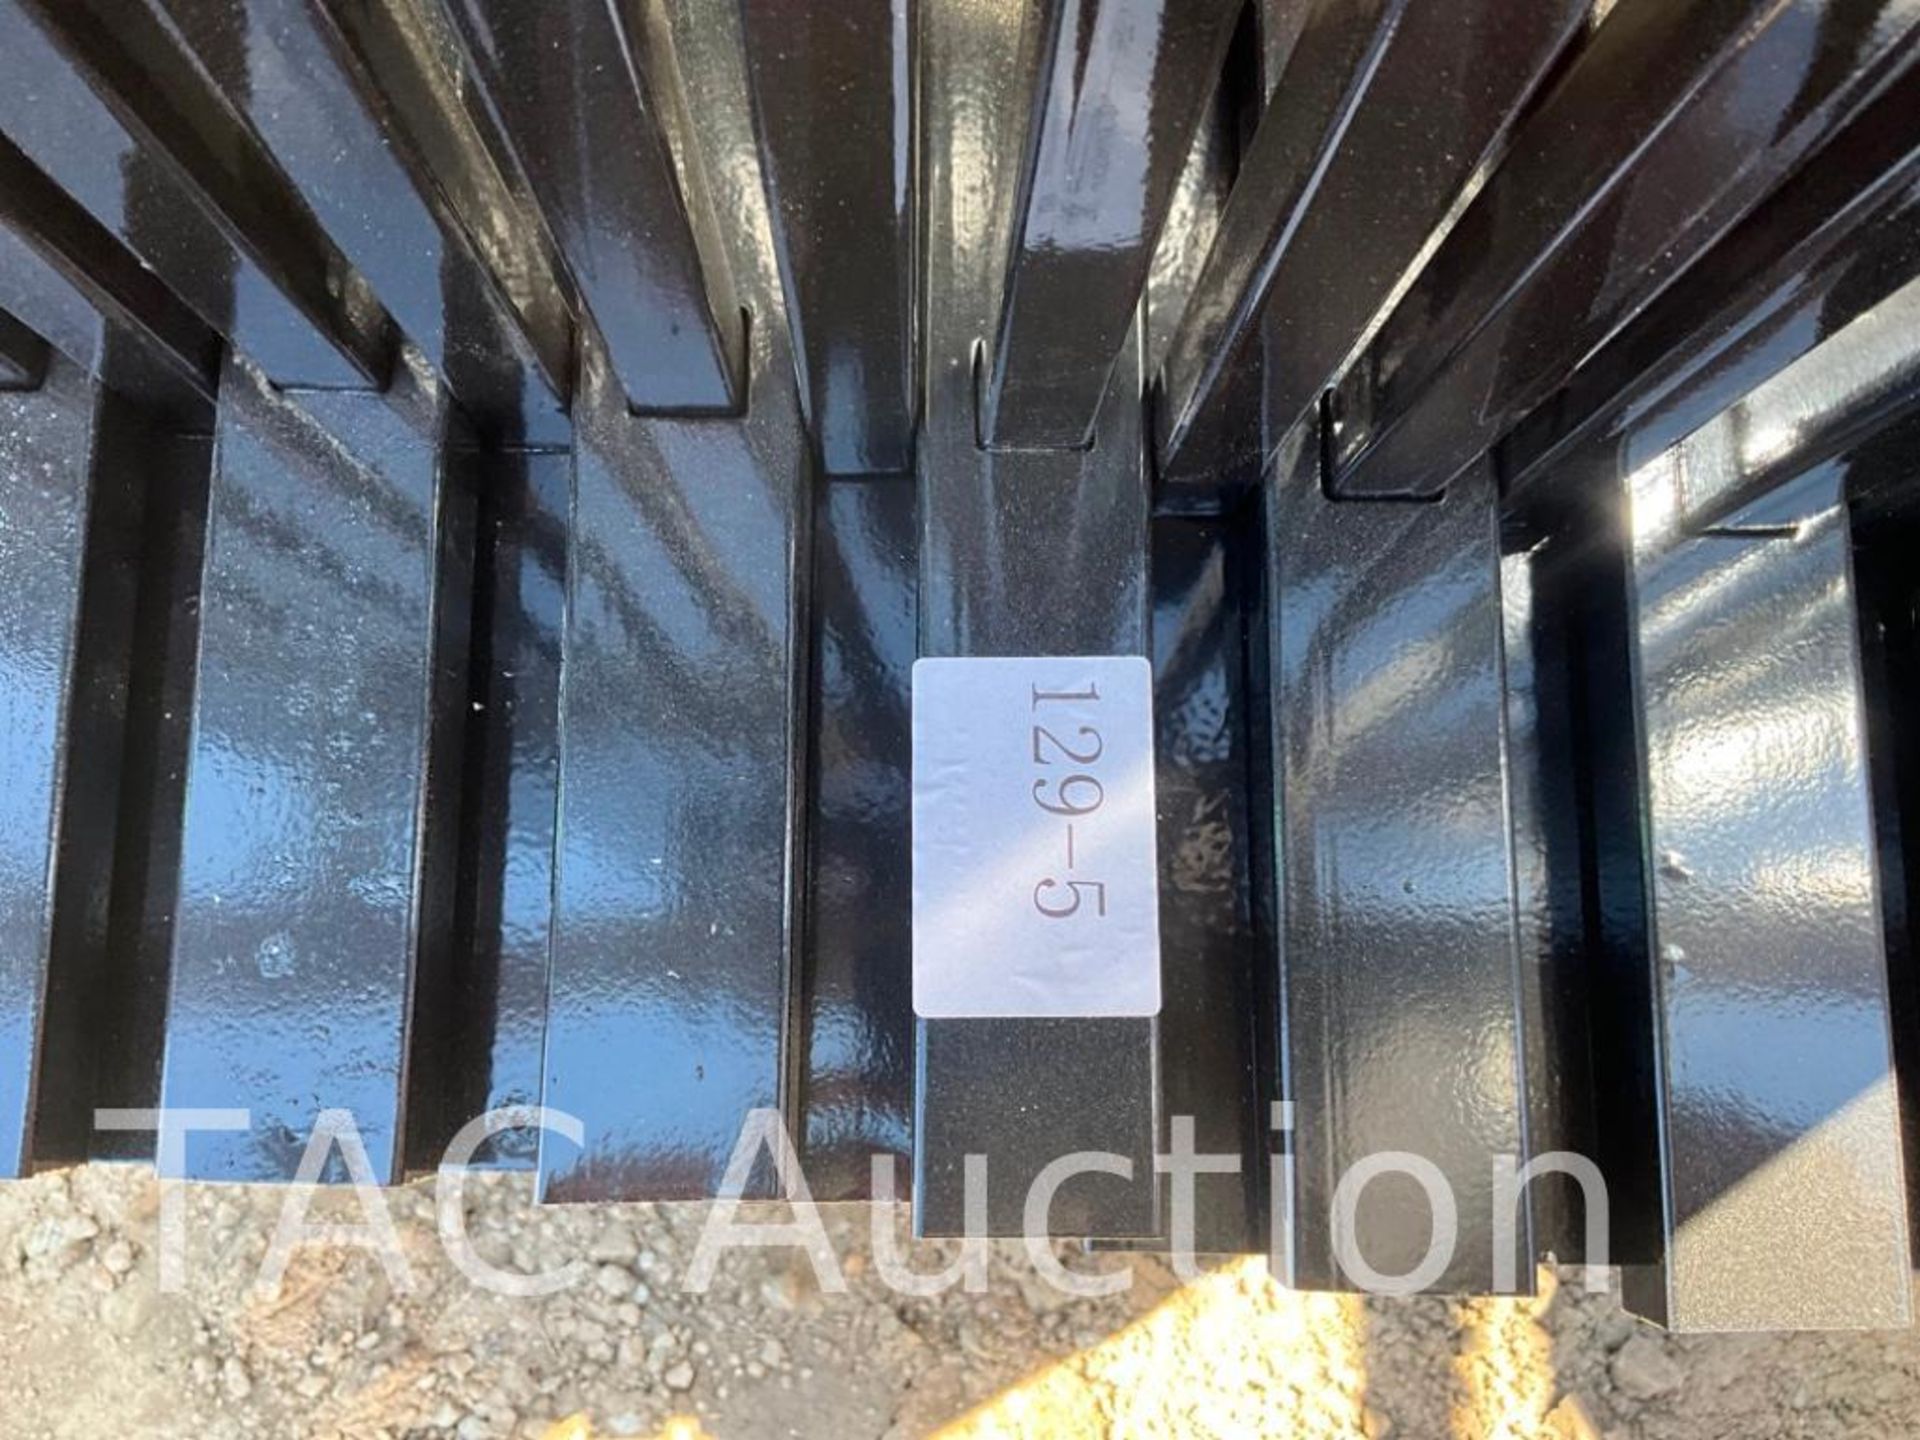 New Powder Coated Galvanized Steel Fencing - Image 8 of 8